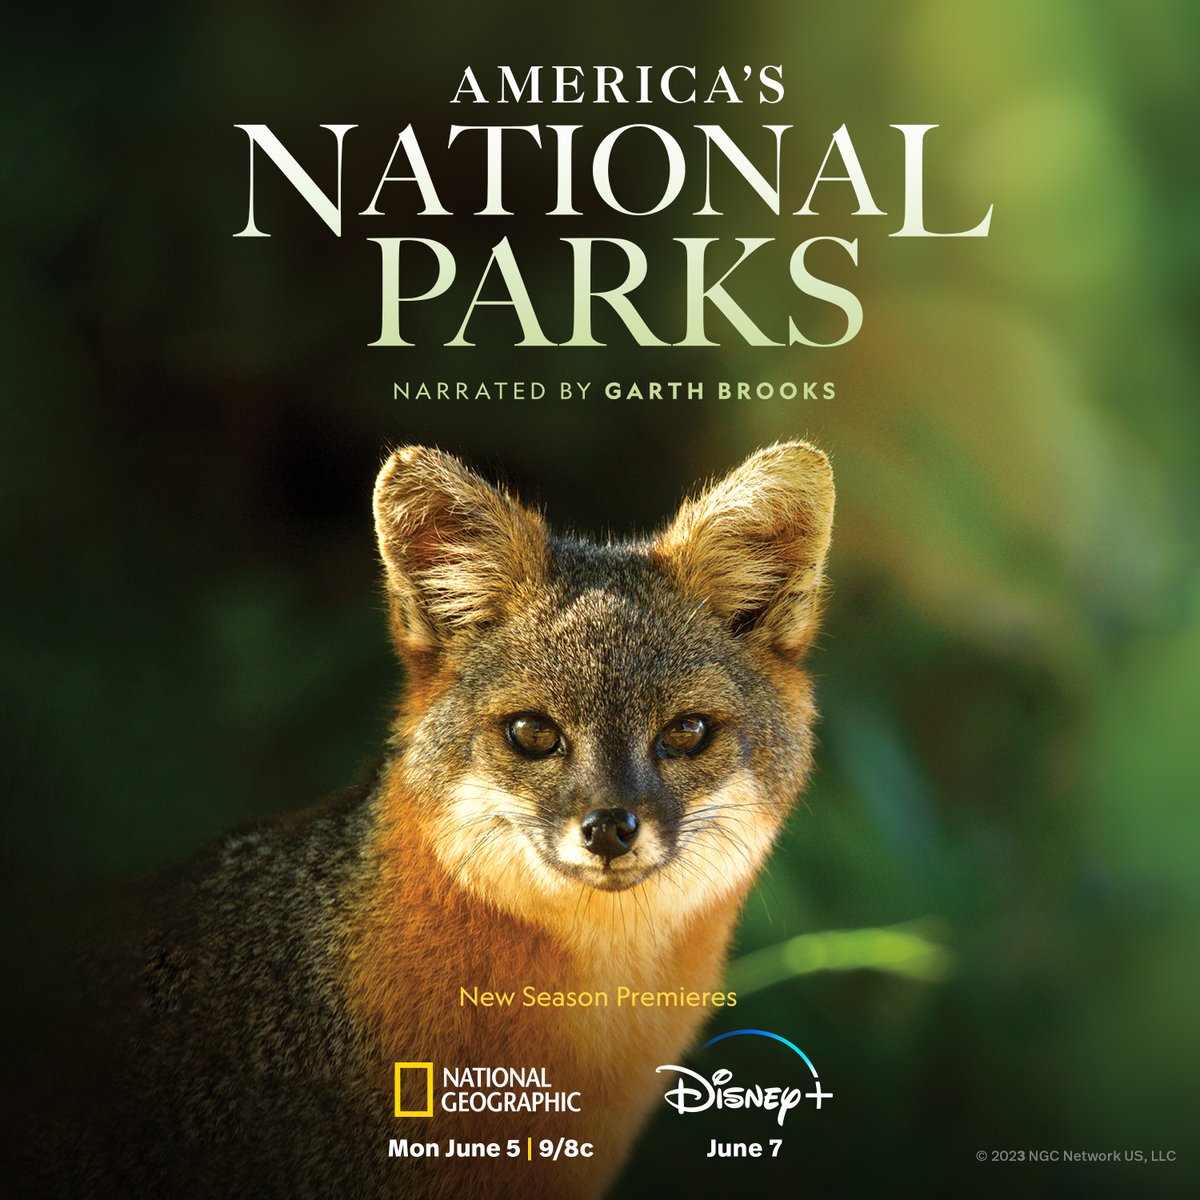 Are you ready for another adventure? Discover America's extraordinary wildlife in all-new episodes of #AmericasNationalParks, narrated by @GarthBrooks. 
Season 2 premieres on Monday, June 5 at 9/8c on National Geographic. Stream on @hulu and @DisneyPlus.